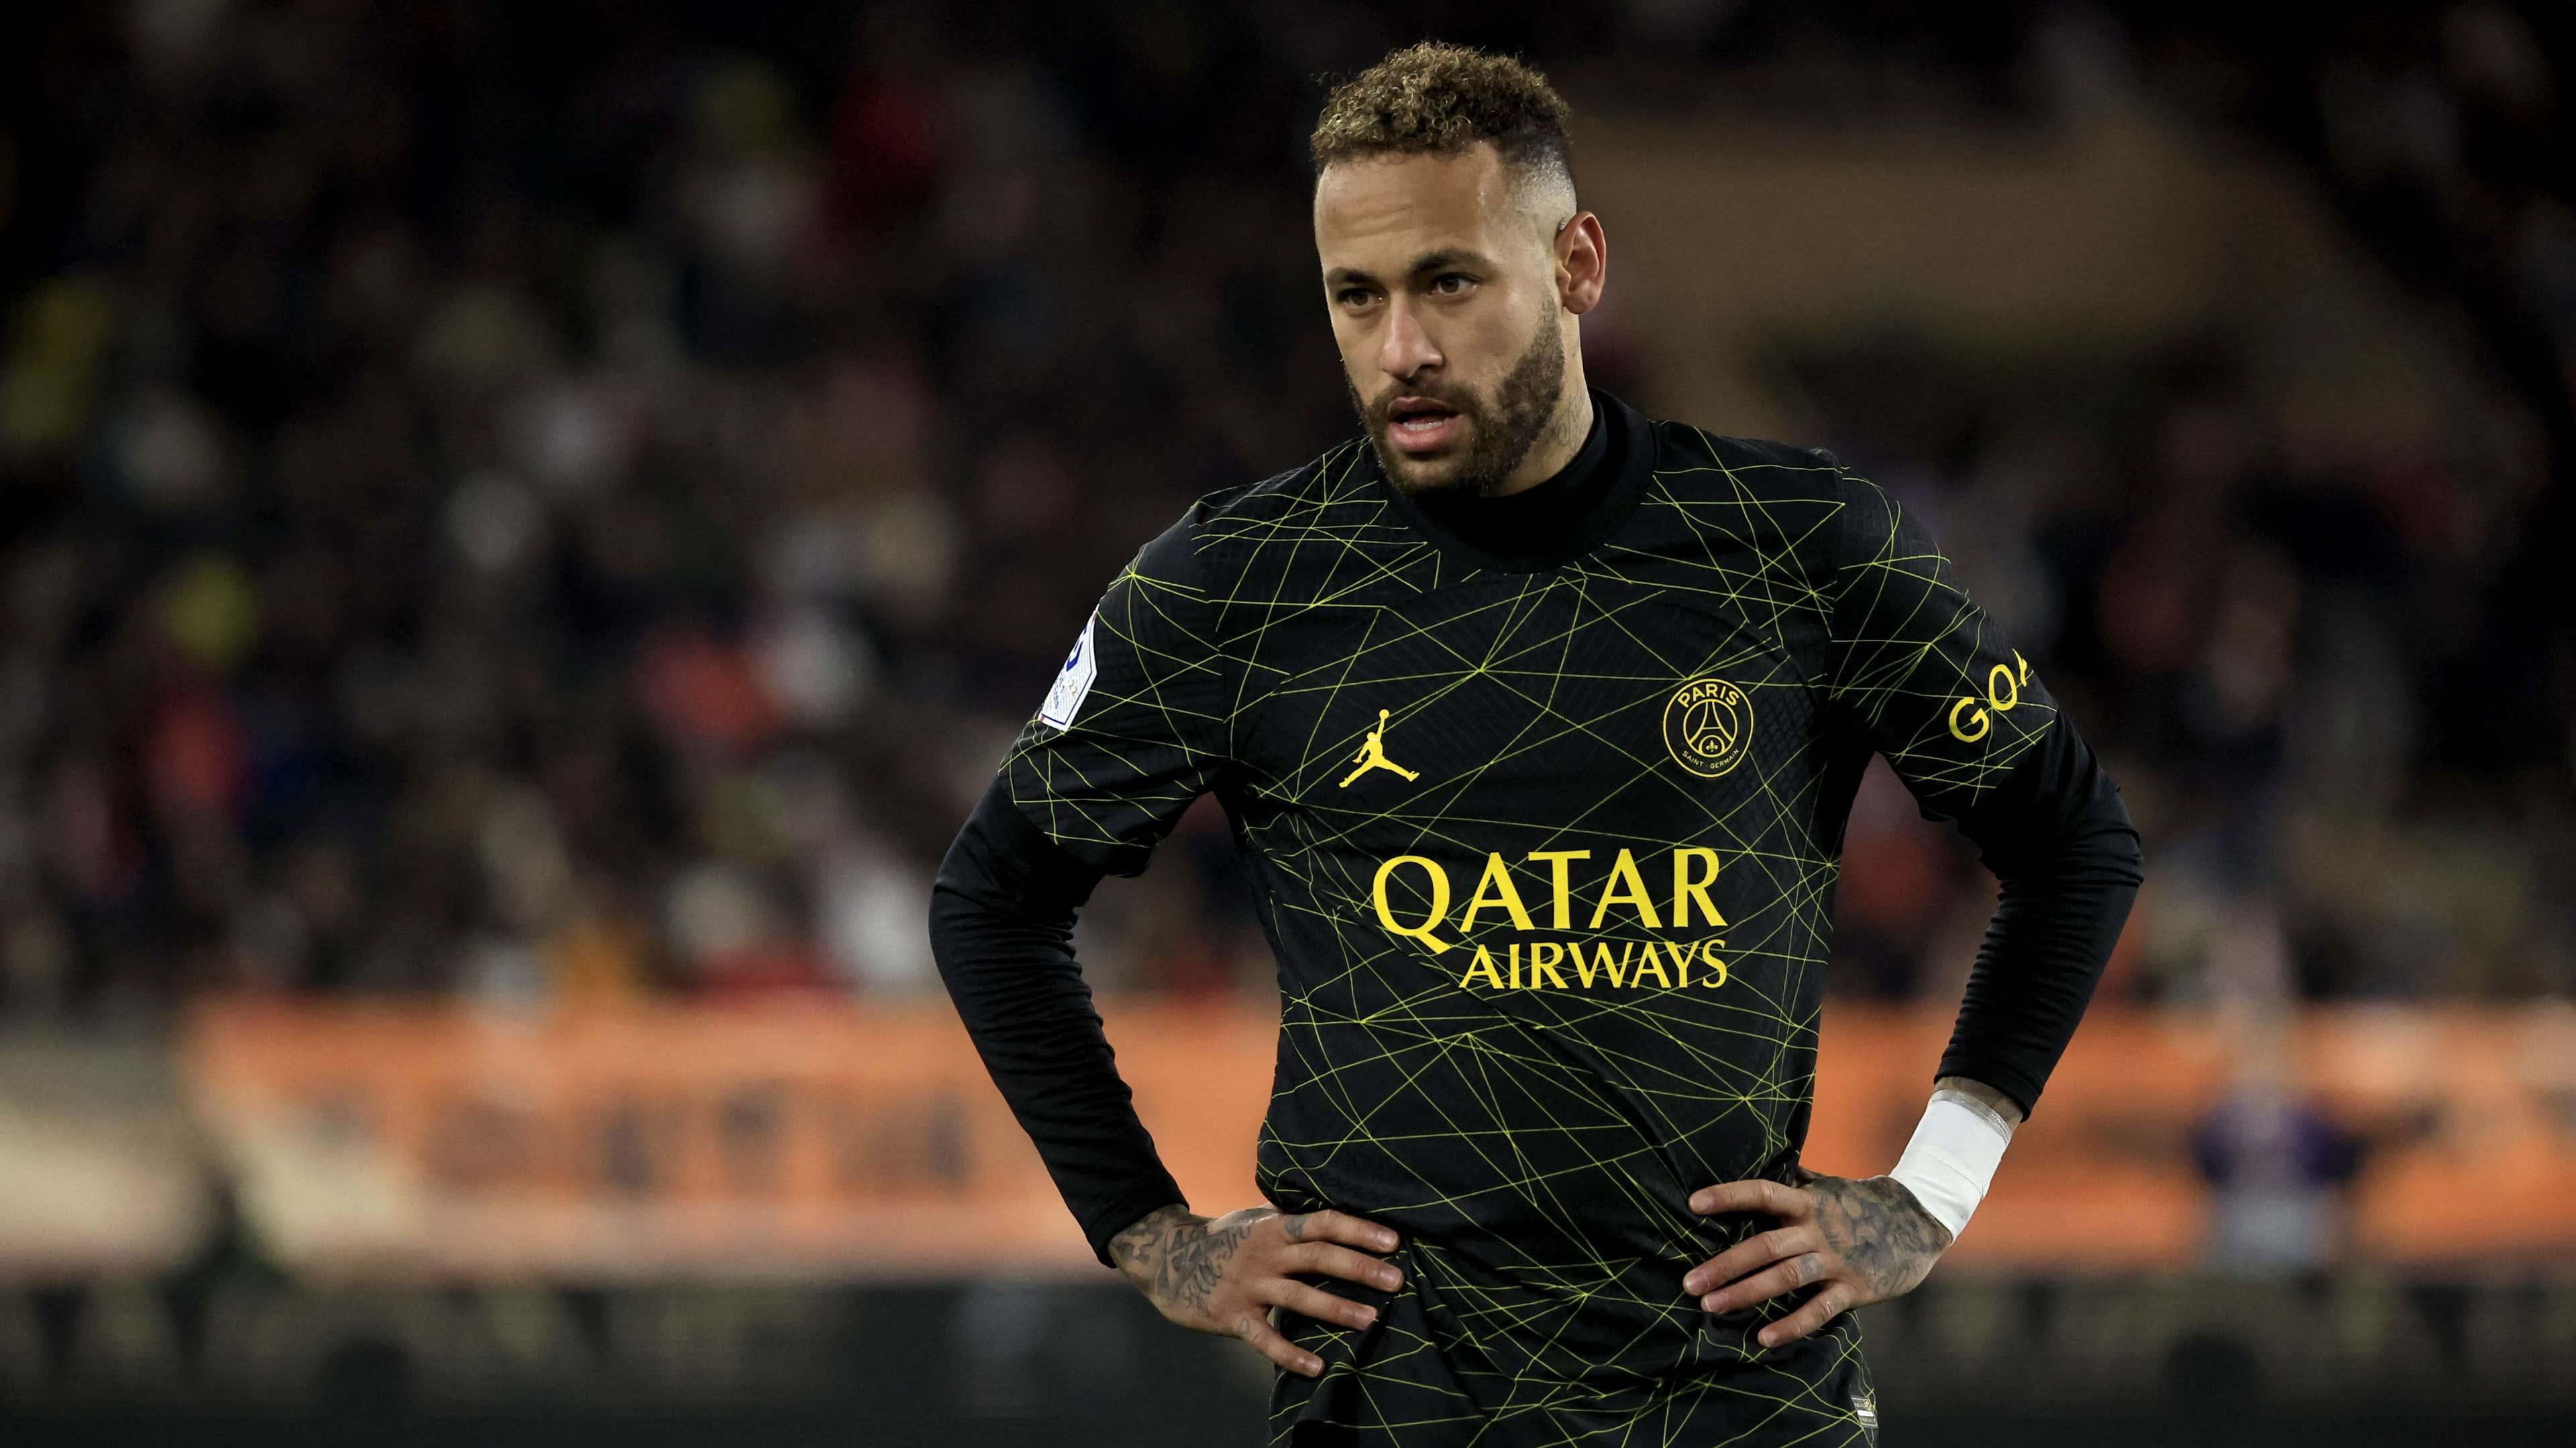 Psg Want Neymar Out World S Most Expensive Player To Go On Summer